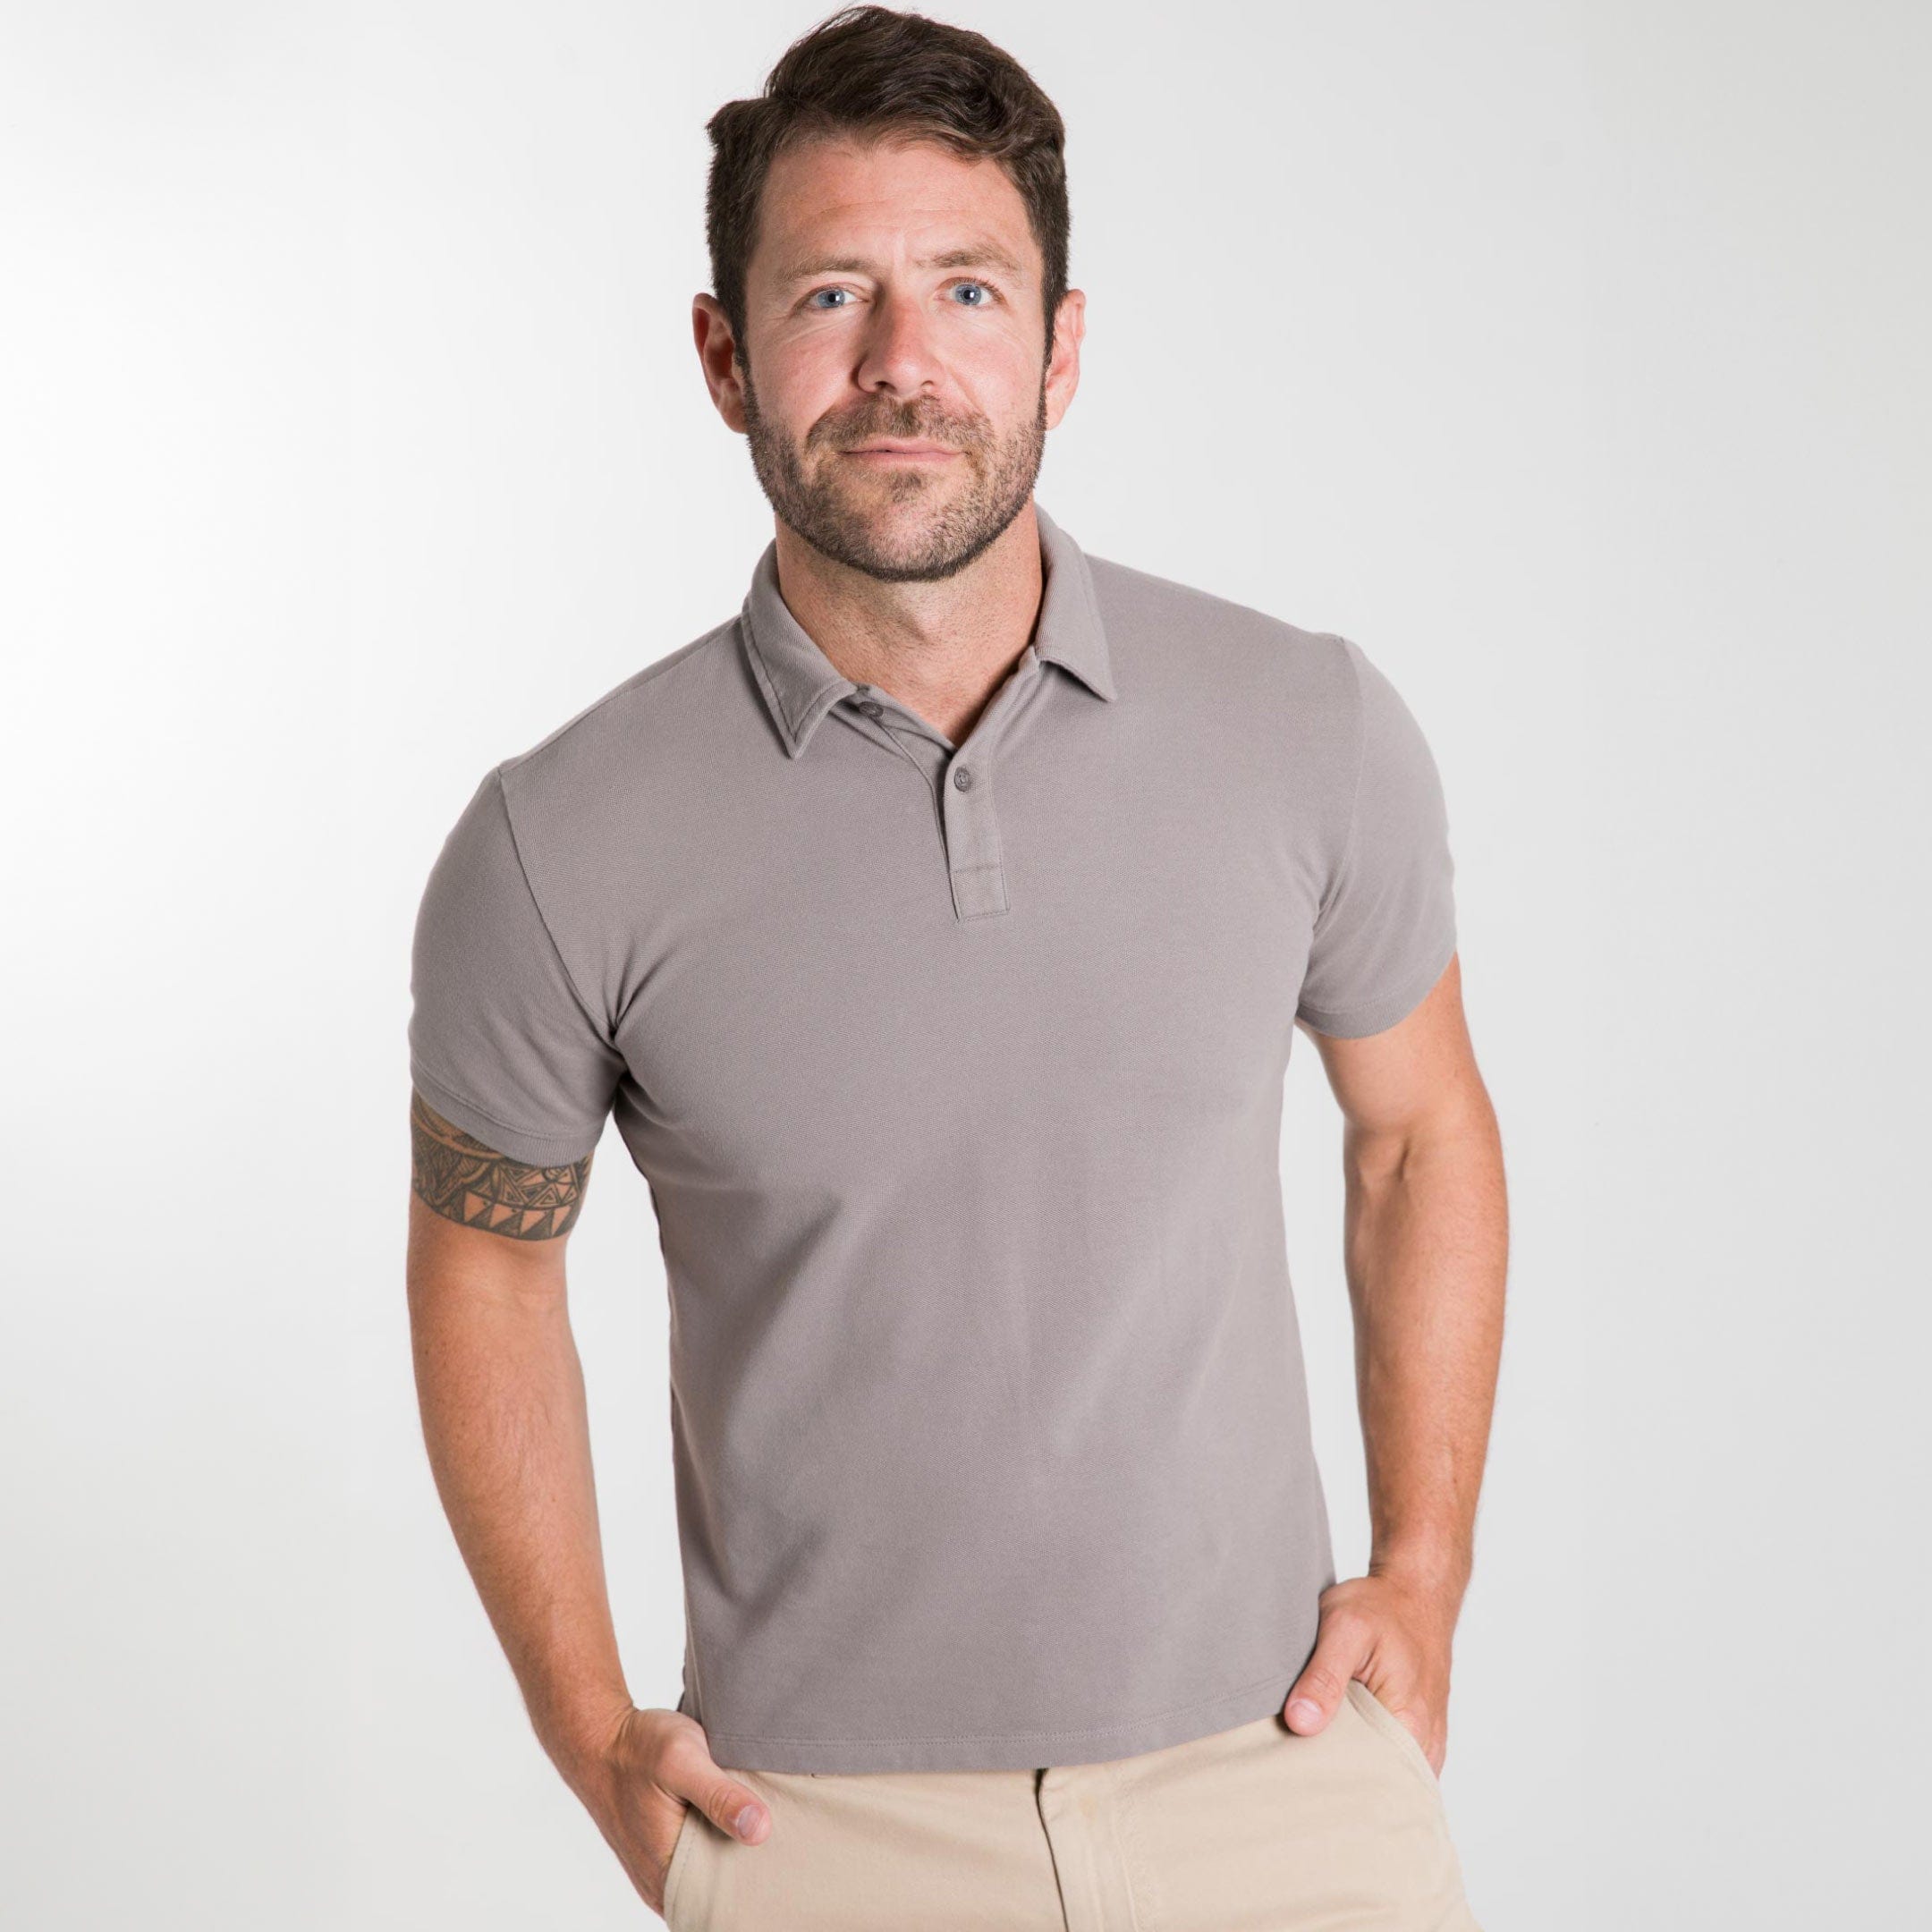 Men's Cotton/Poly Pique Blend Short Sleeve Polo Shirt in Heather Grey -  Available in Men's Sizes SMALL to 6XL Item # 750-1500